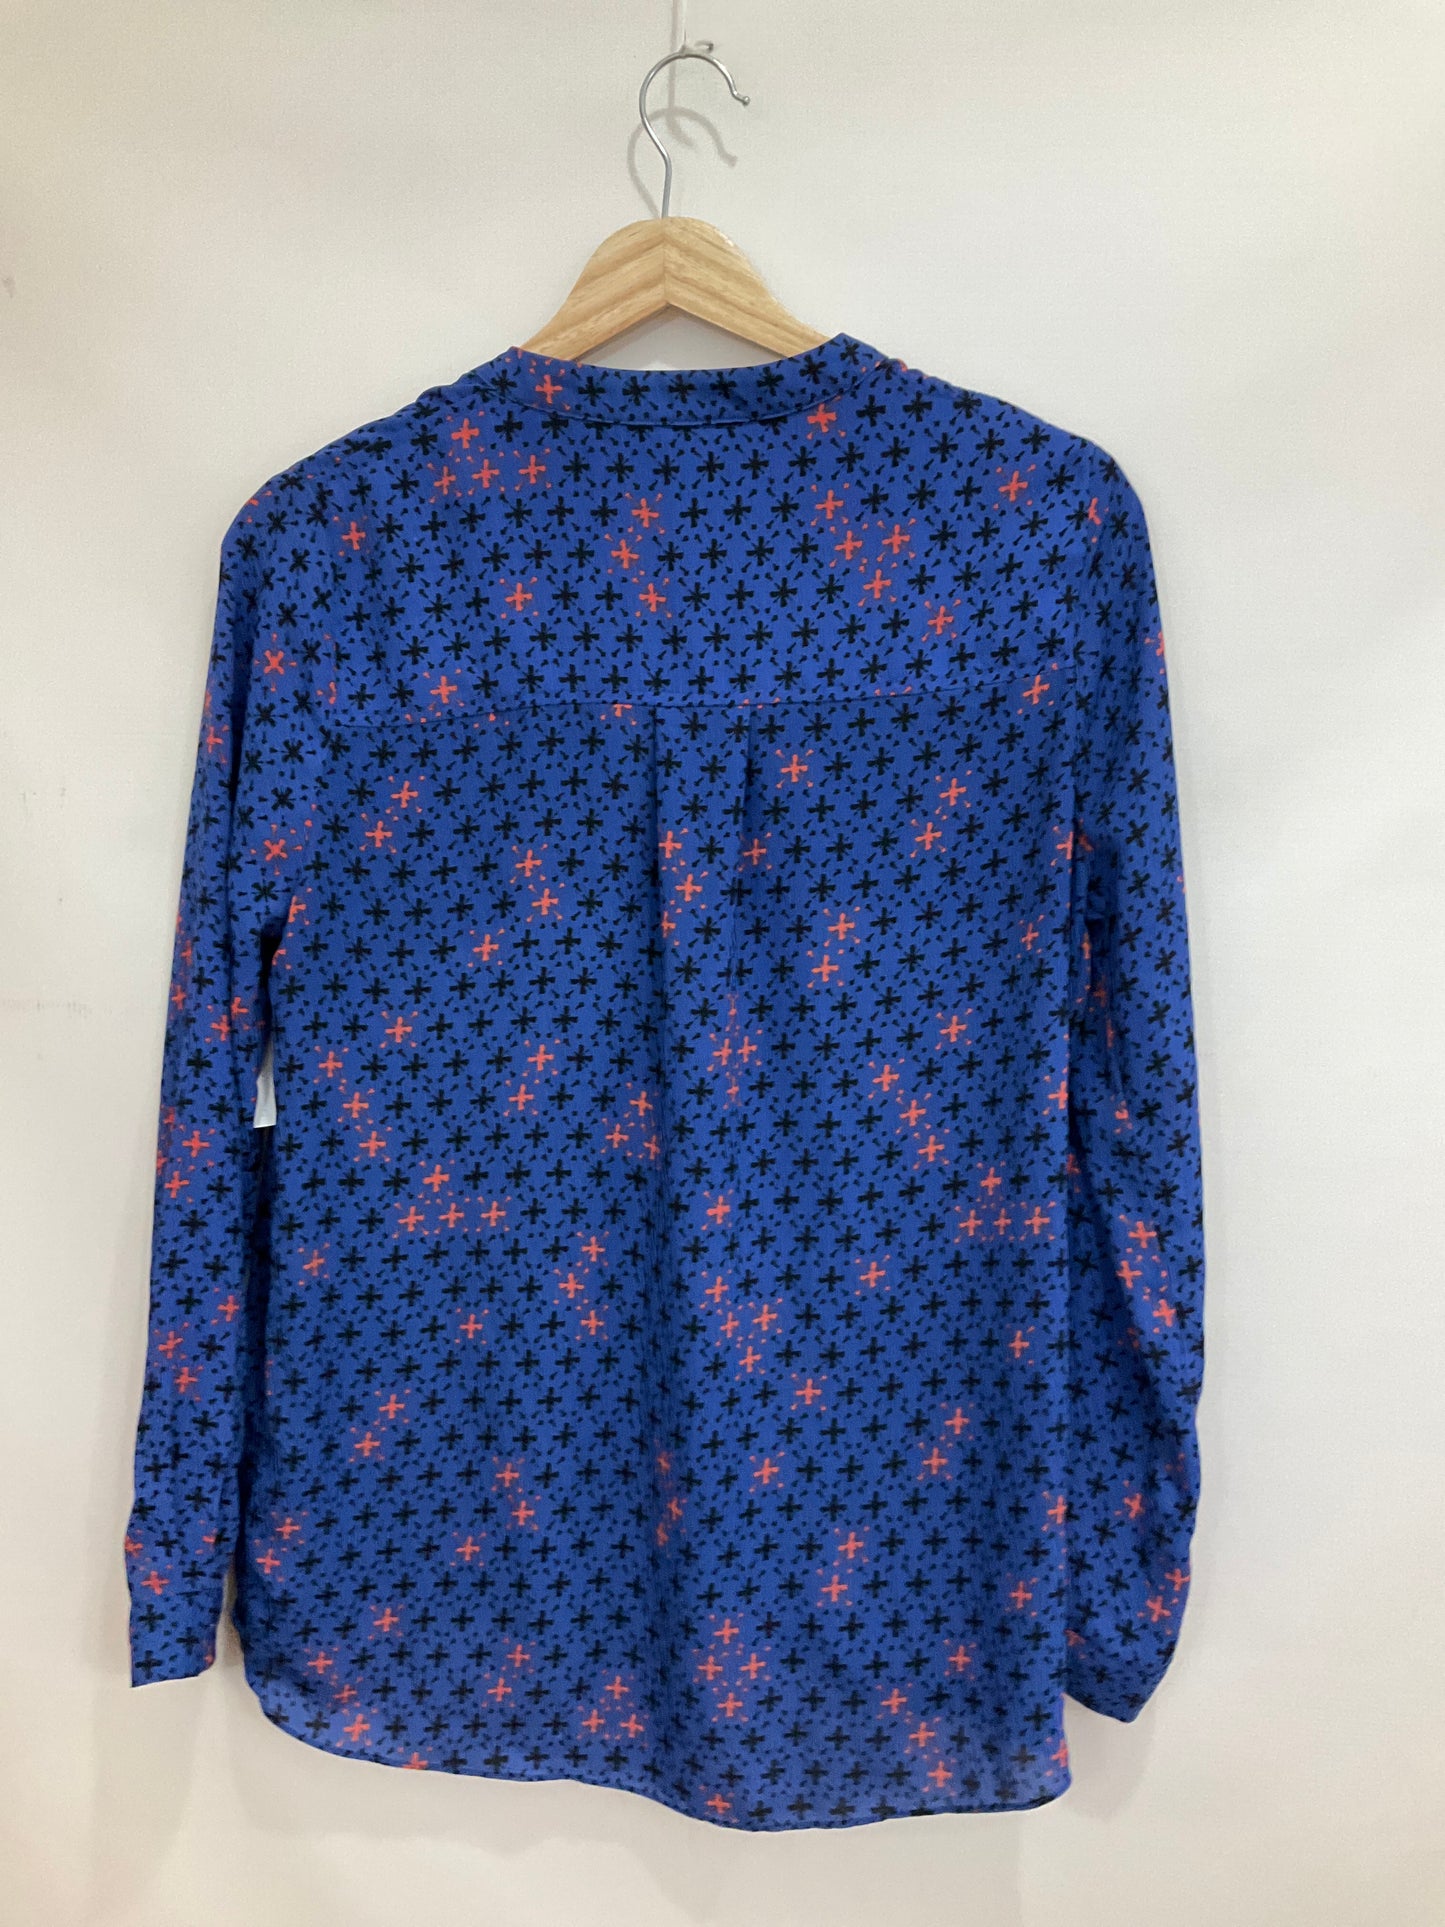 Top Long Sleeve By Maeve  Size: S